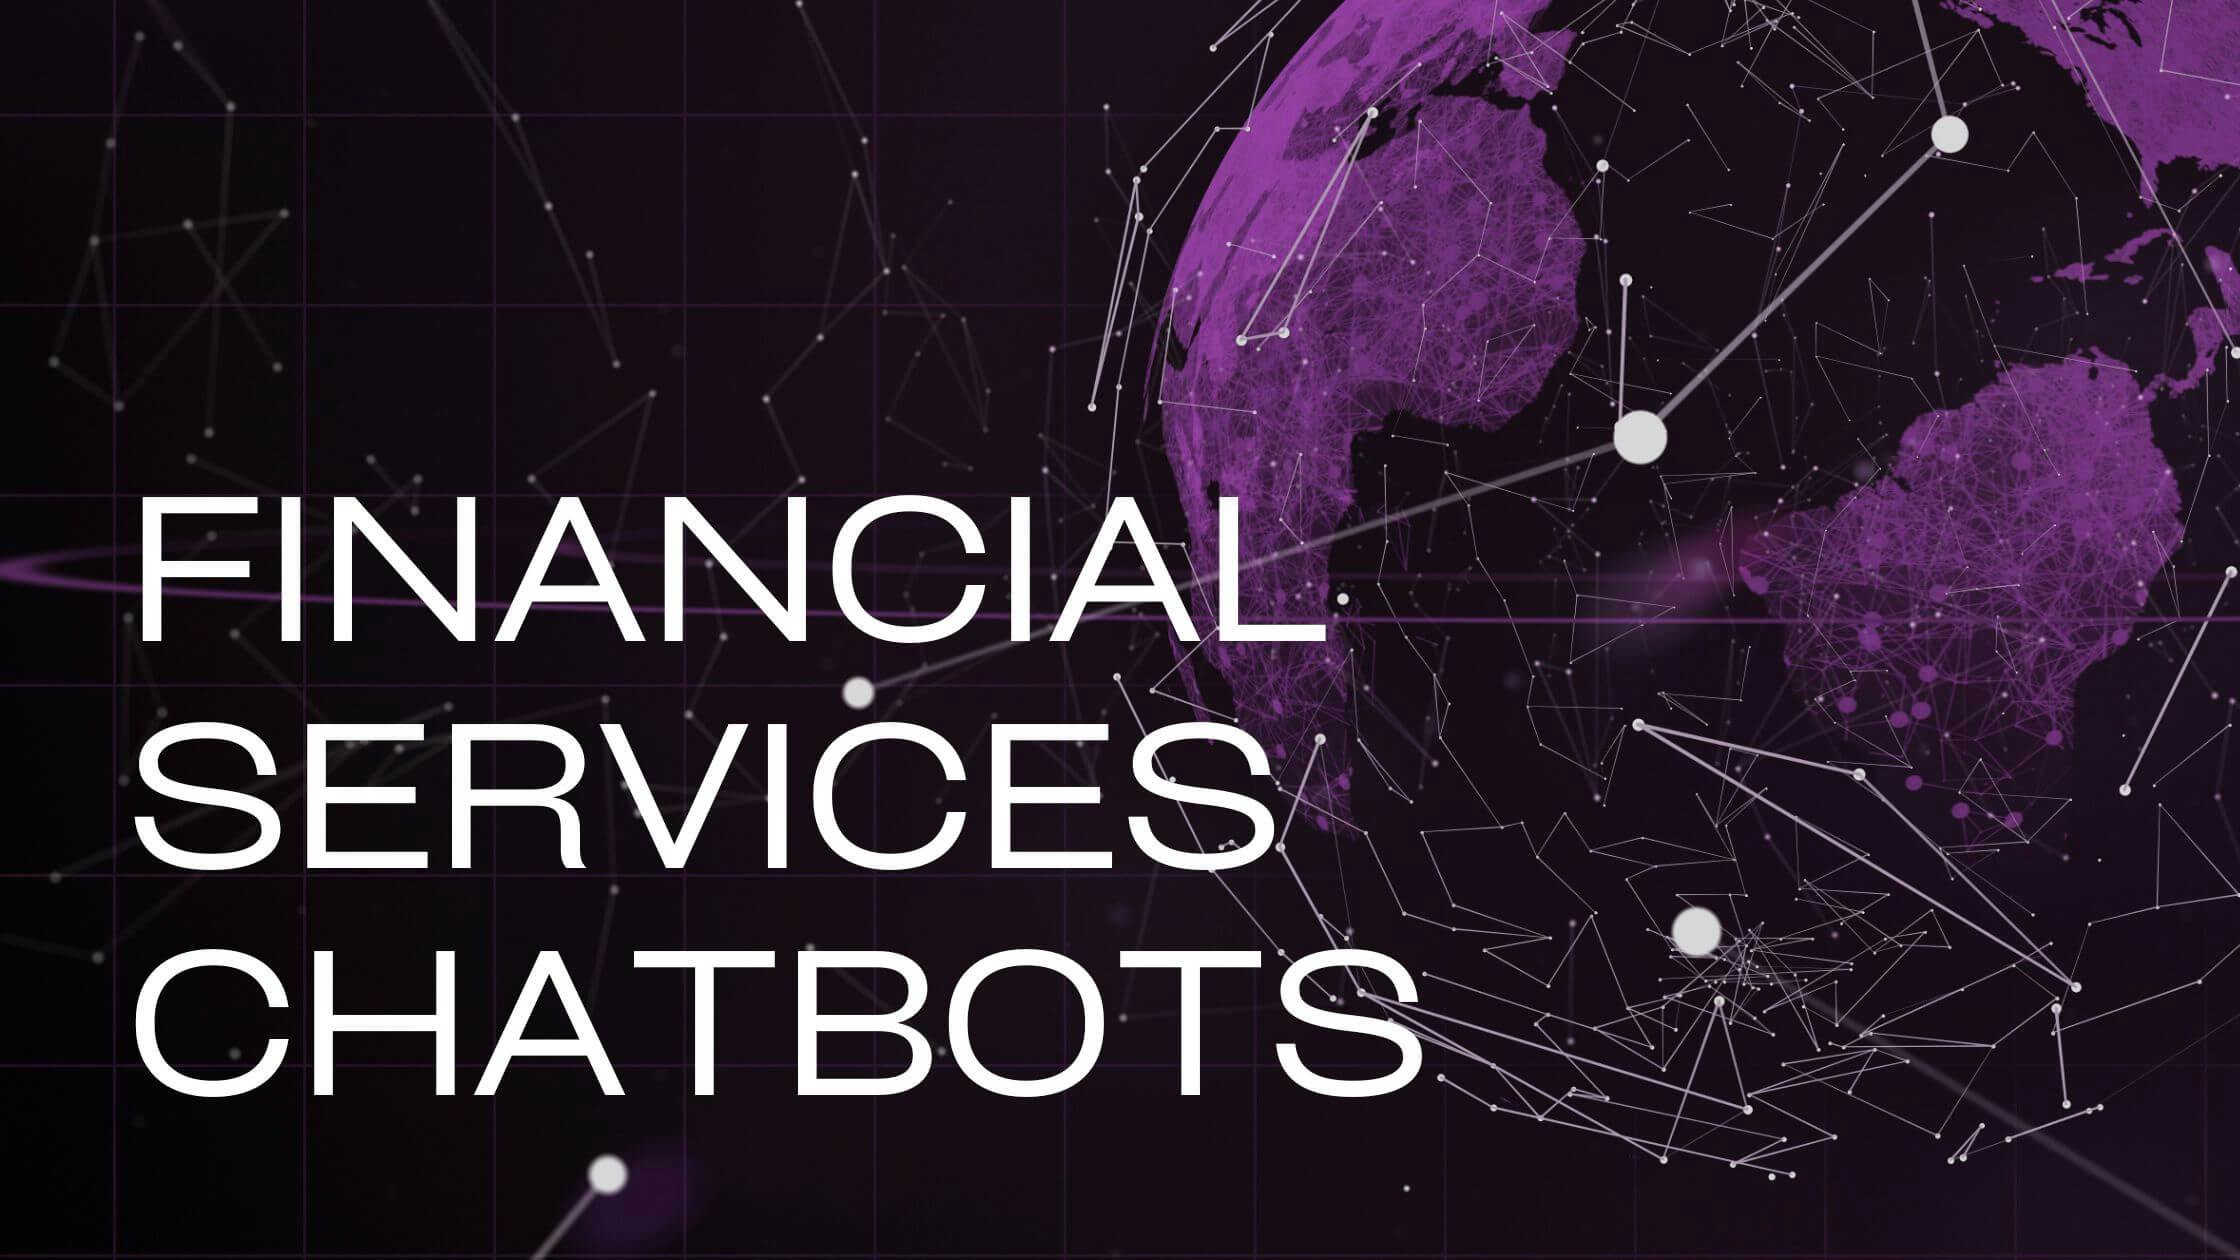 We Tried the 4 Best Chatbots for Financial Services